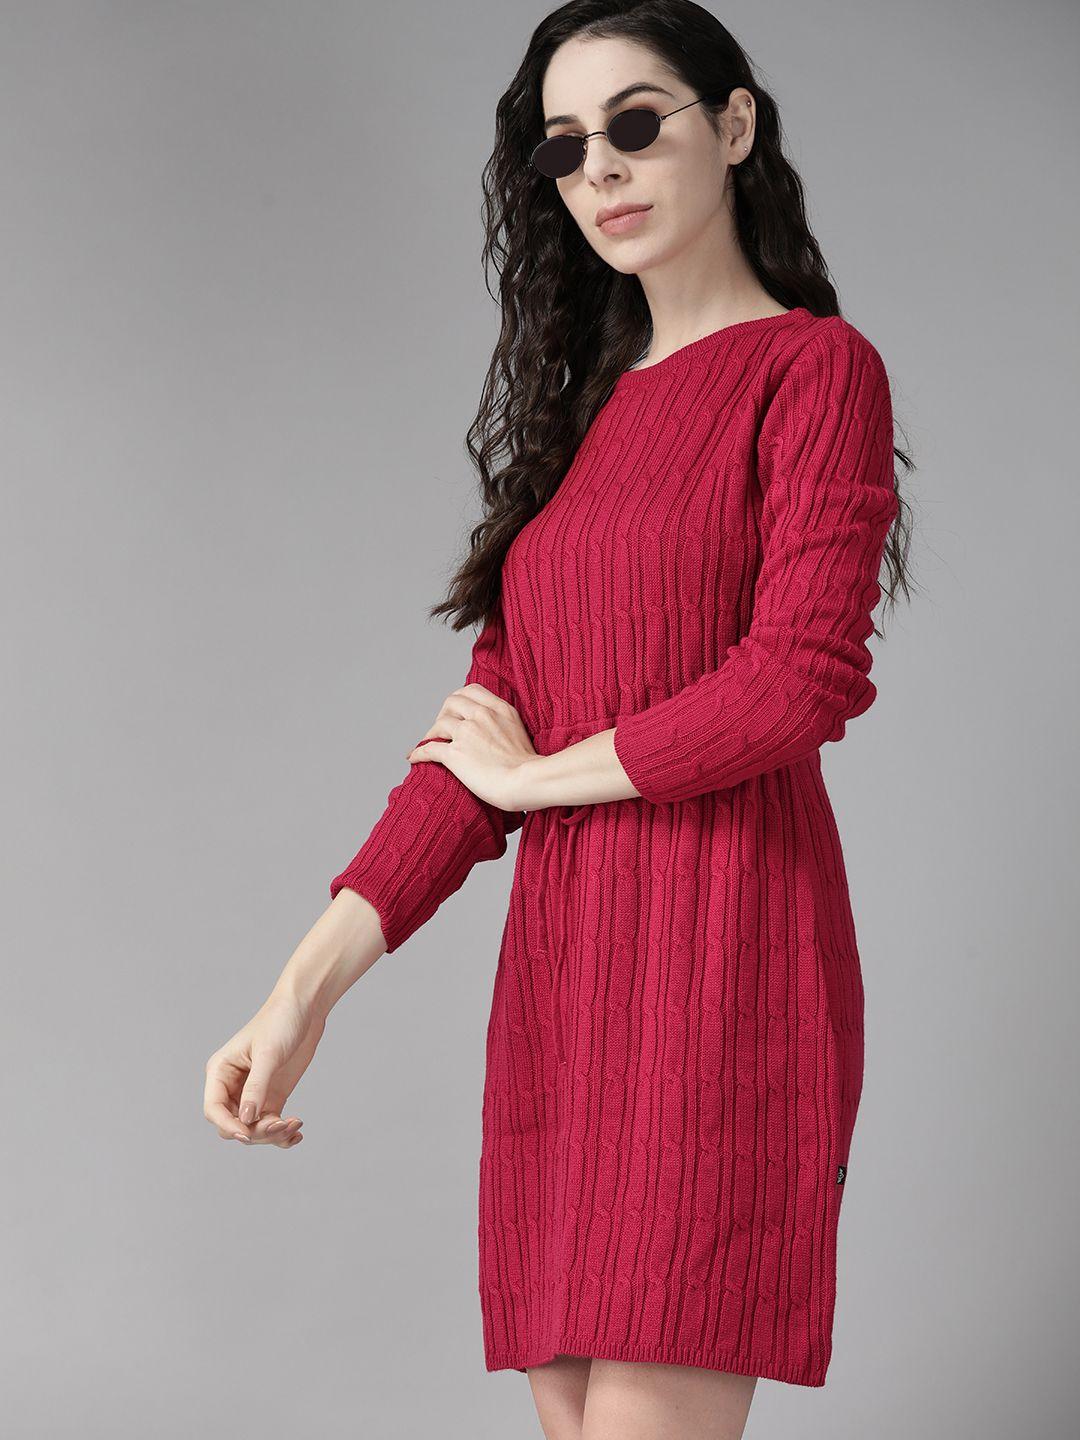 the roadster lifestyle co. women red cable knit acrylic sweater dress